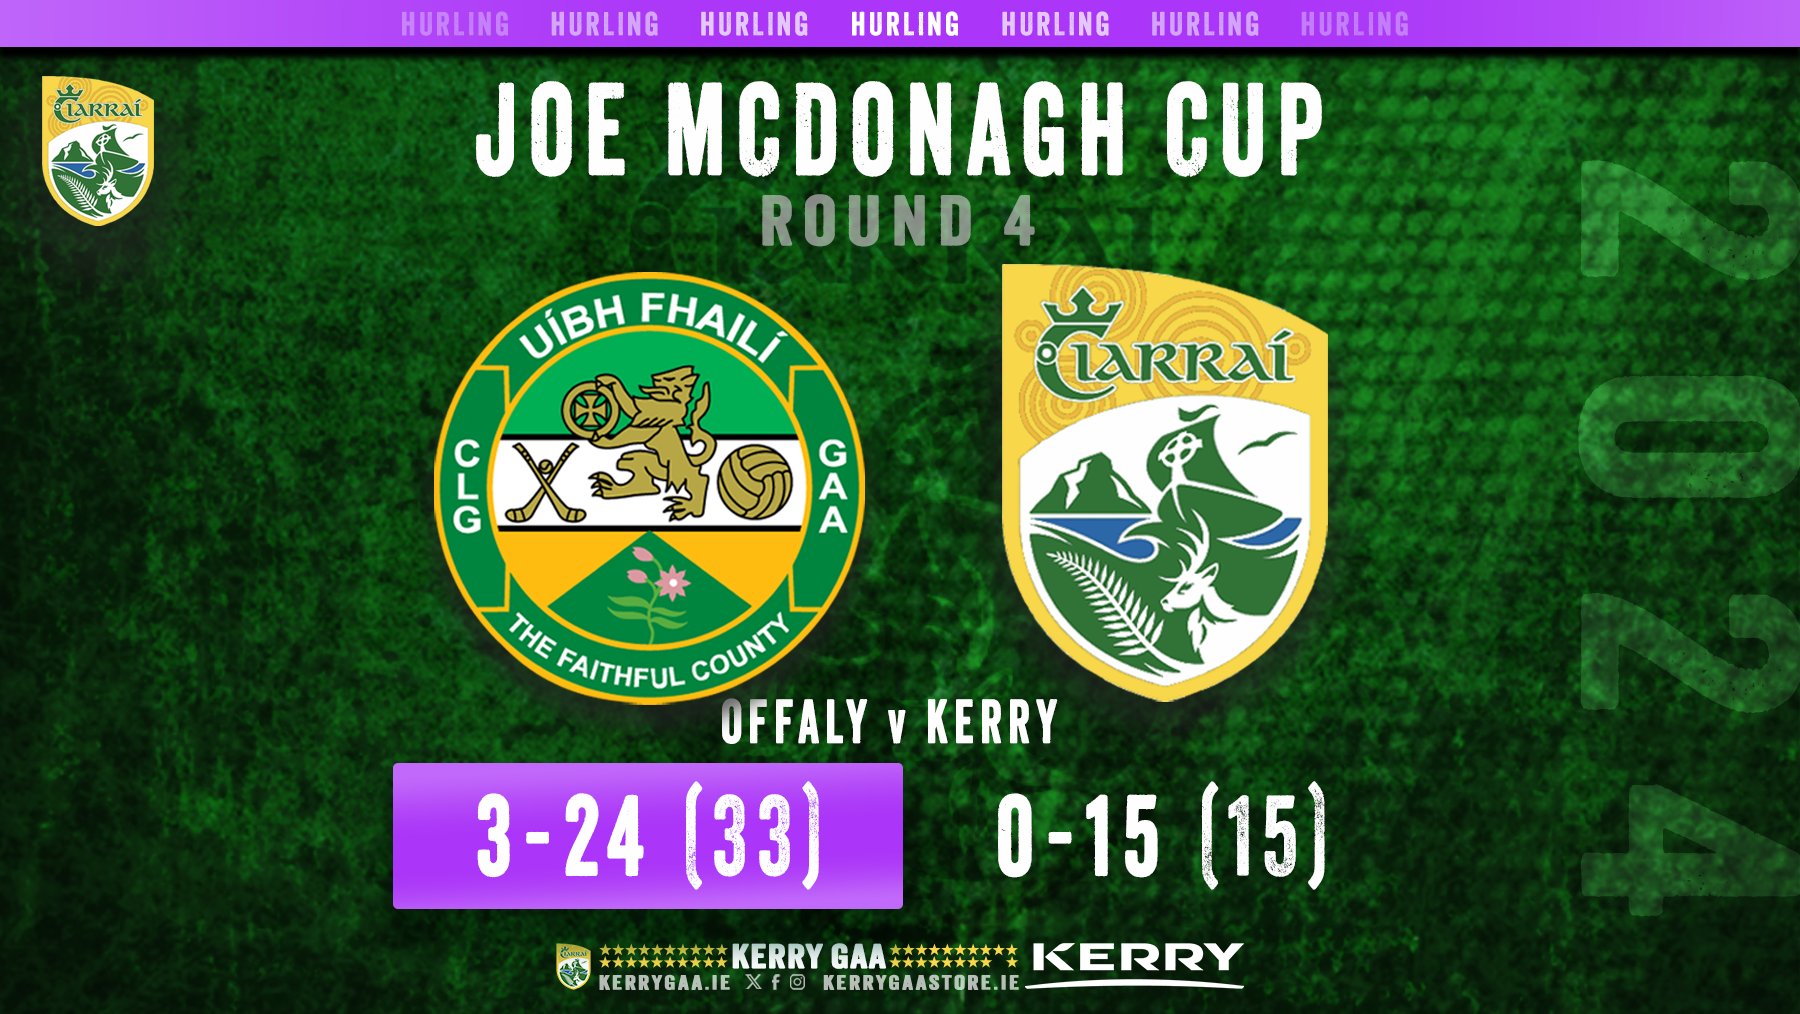 Offaly prove too strong for Kerry in Joe McDonagh Cup